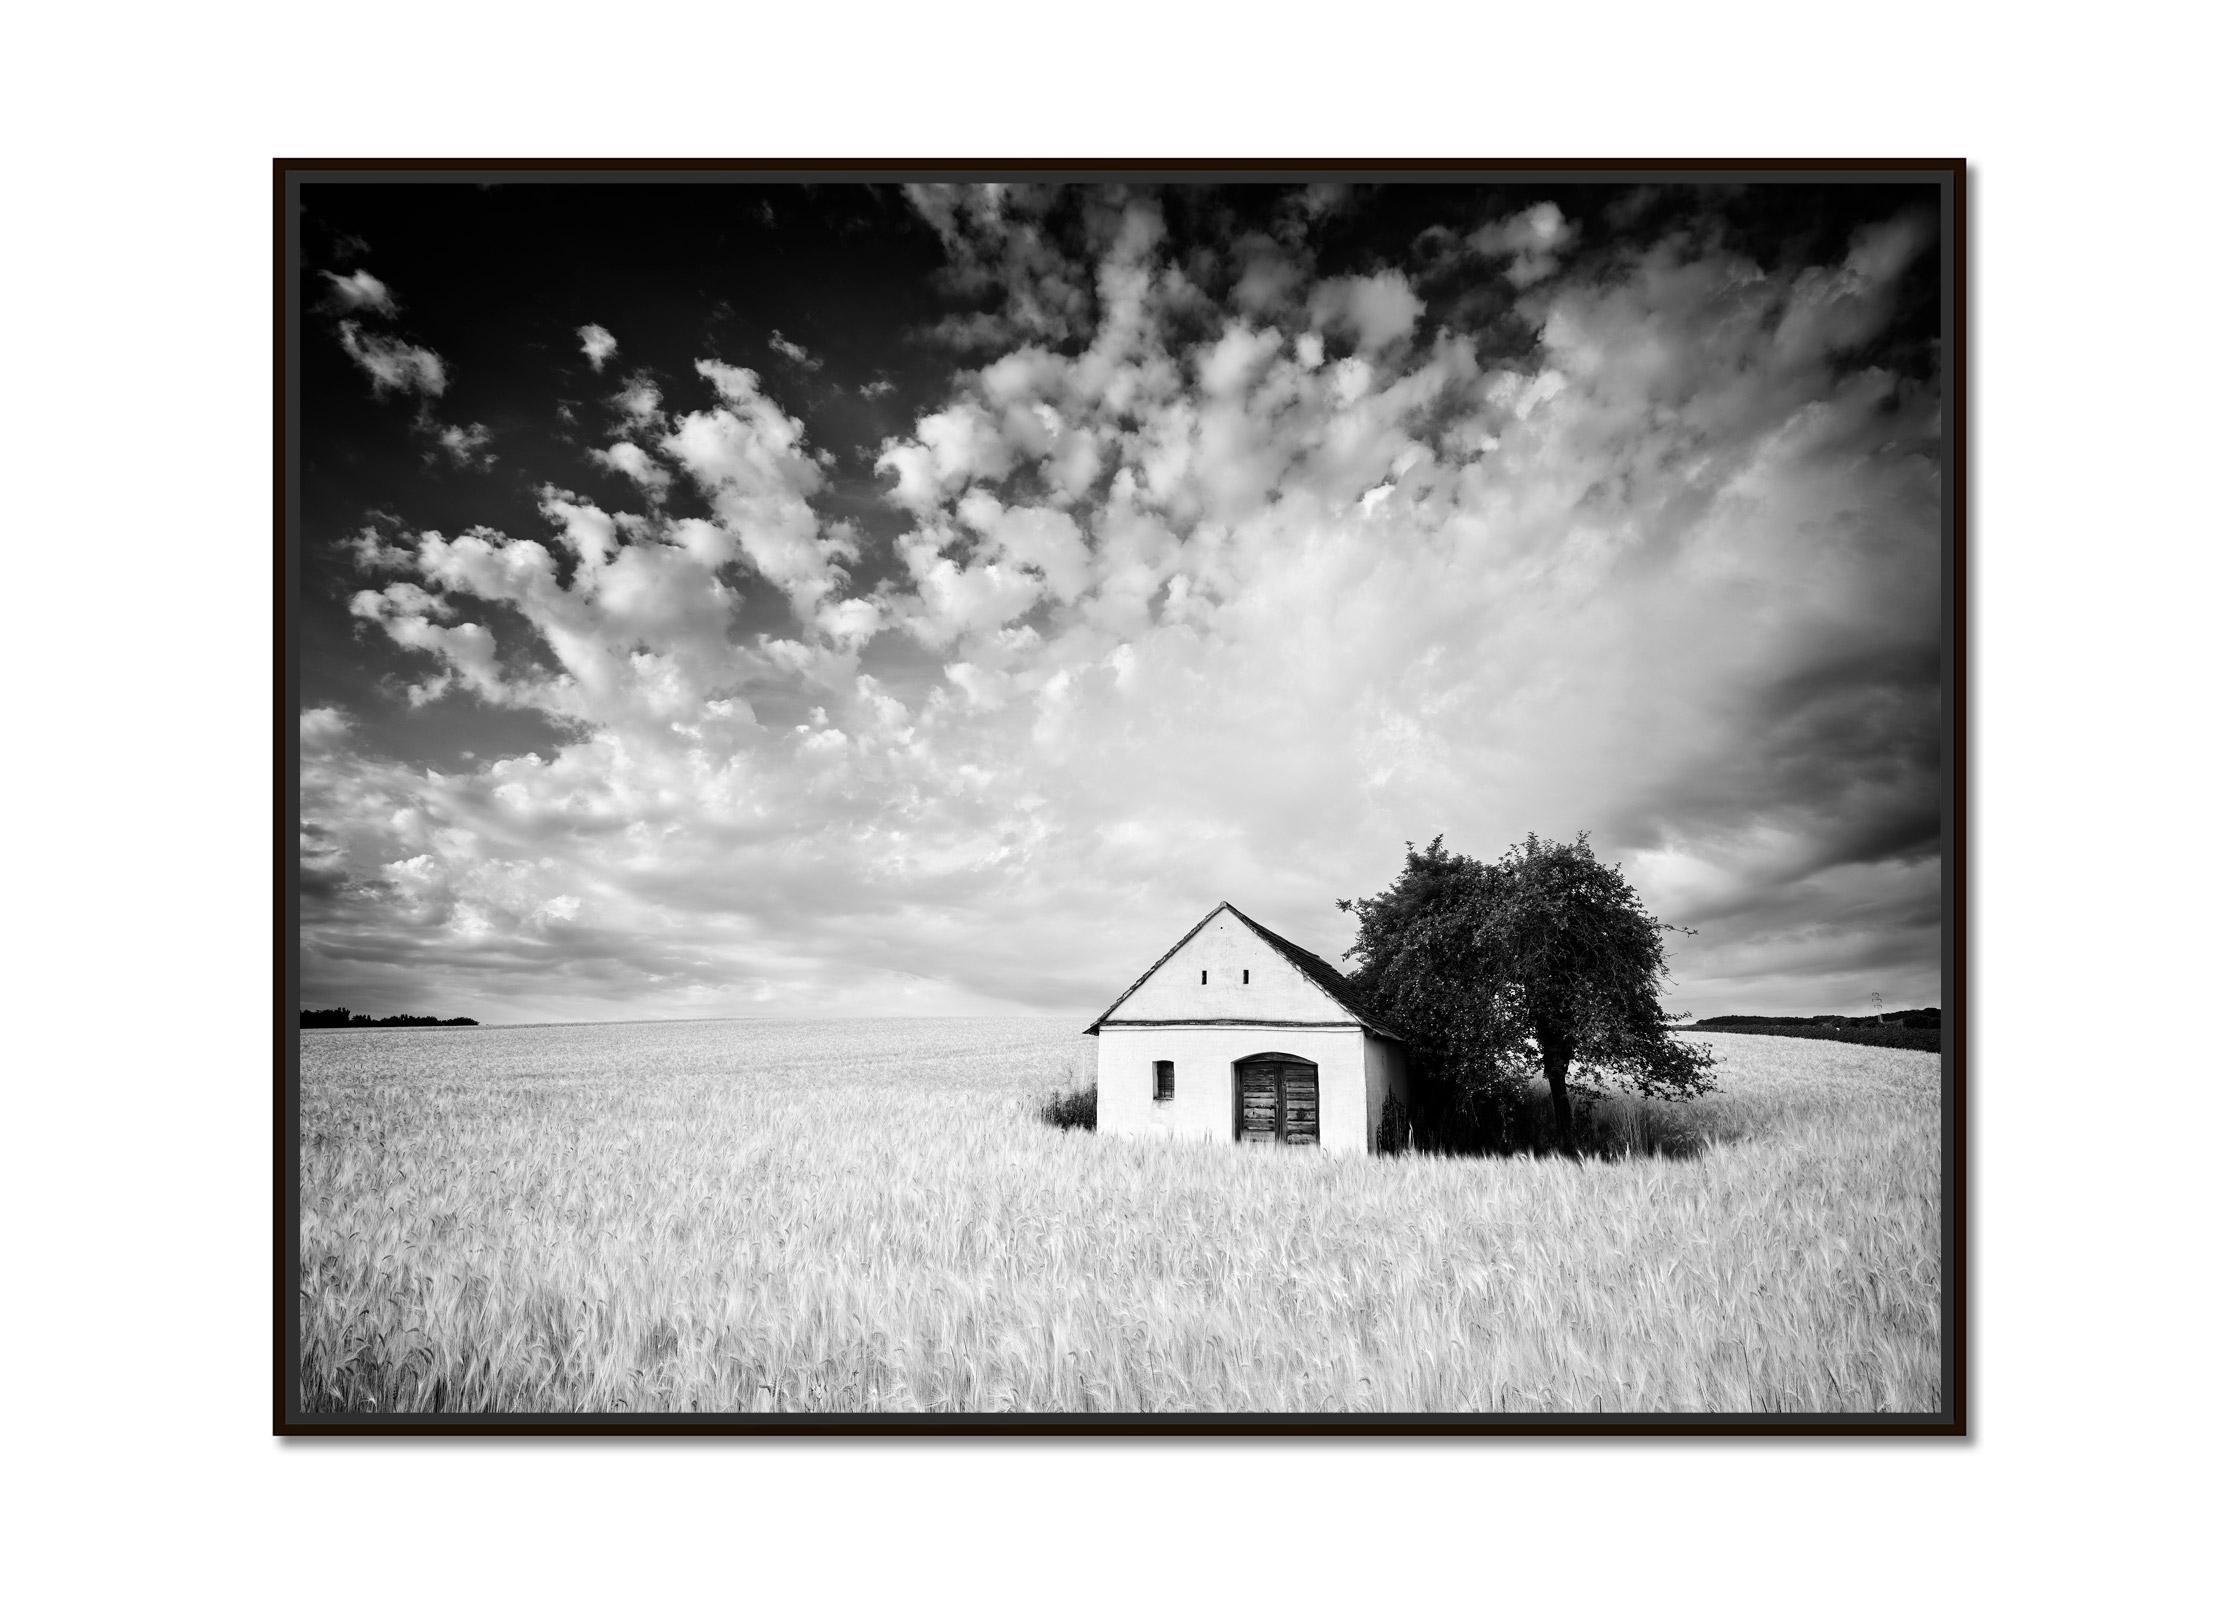 Wine Press House, Cornfield, black and white fine art landscape photography  - Photograph by Gerald Berghammer